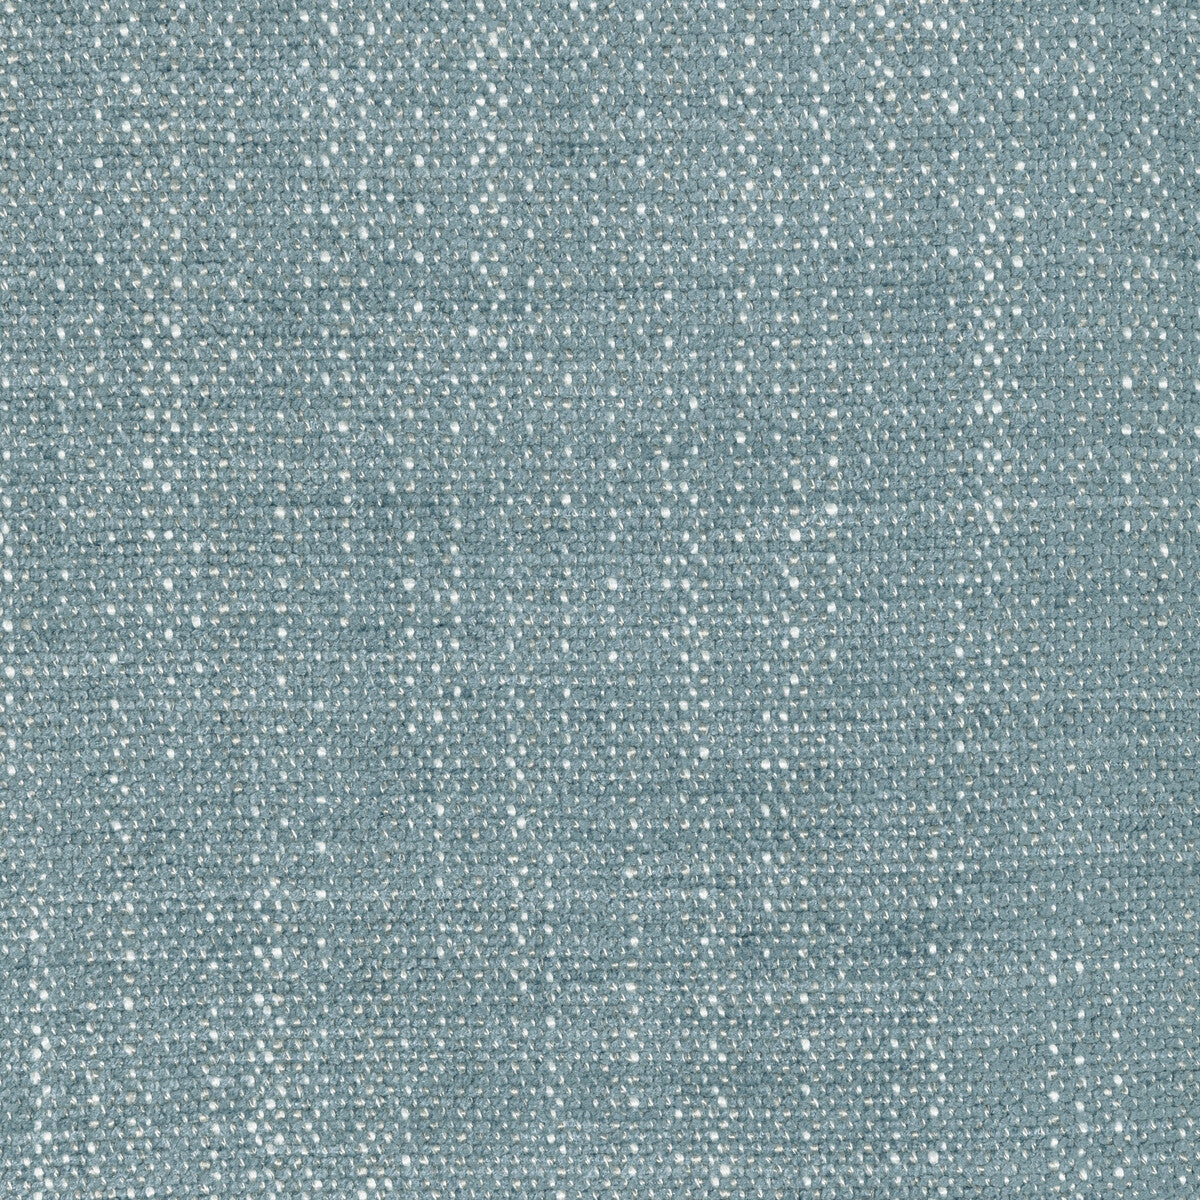 Kravet Design fabric in 36408-15 color - pattern 36408.15.0 - by Kravet Design in the Performance Crypton Home collection